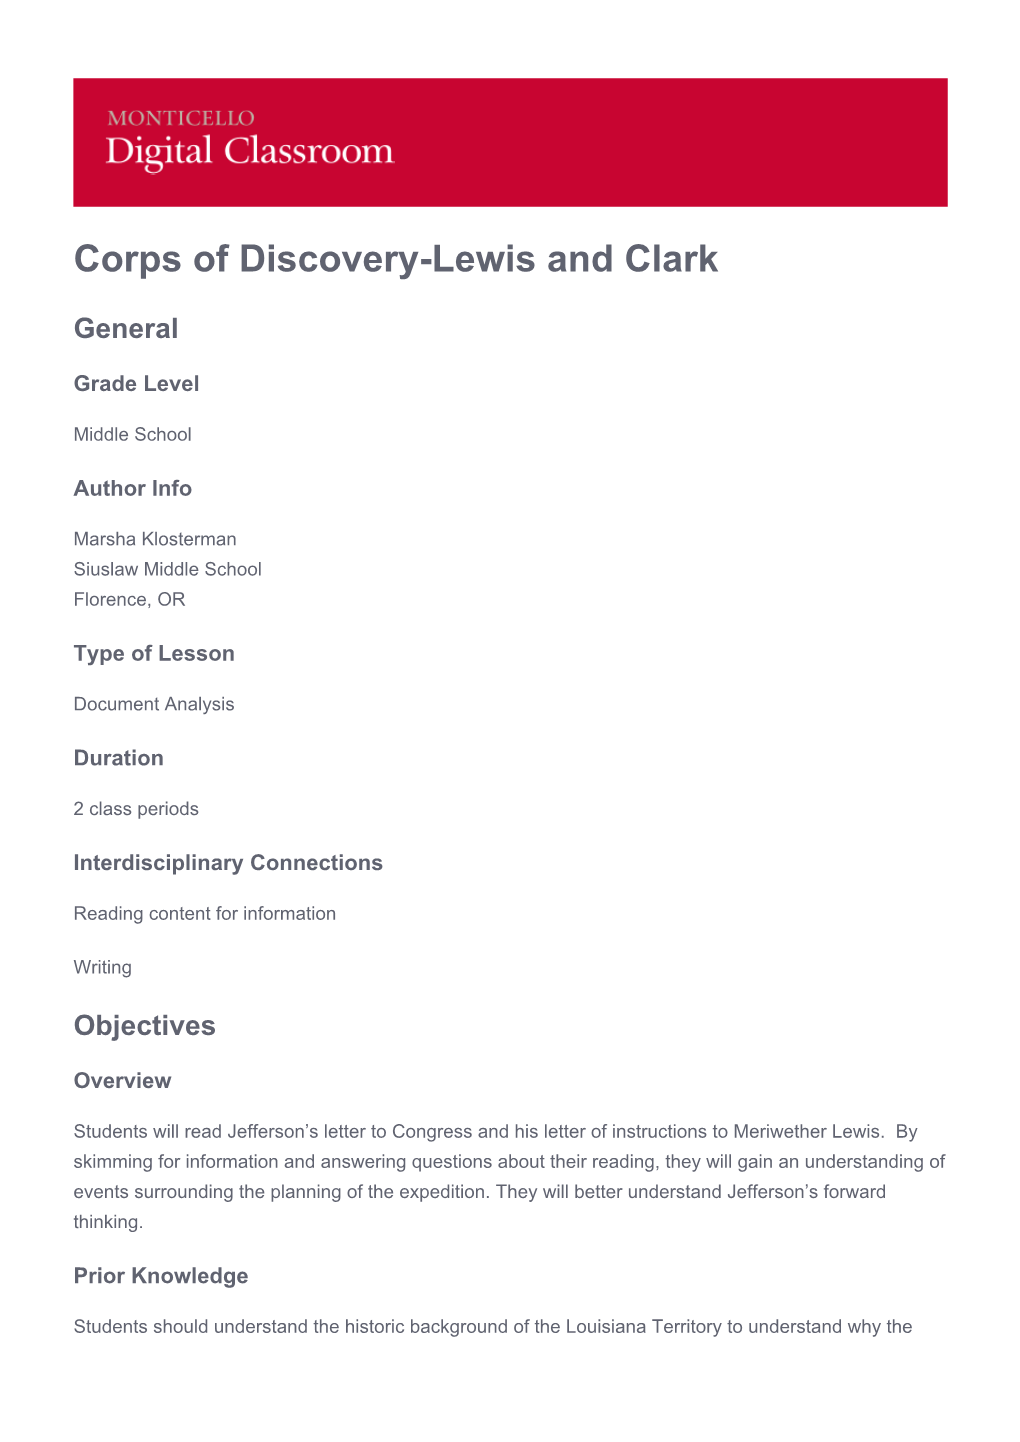 Corps of Discovery-Lewis and Clark